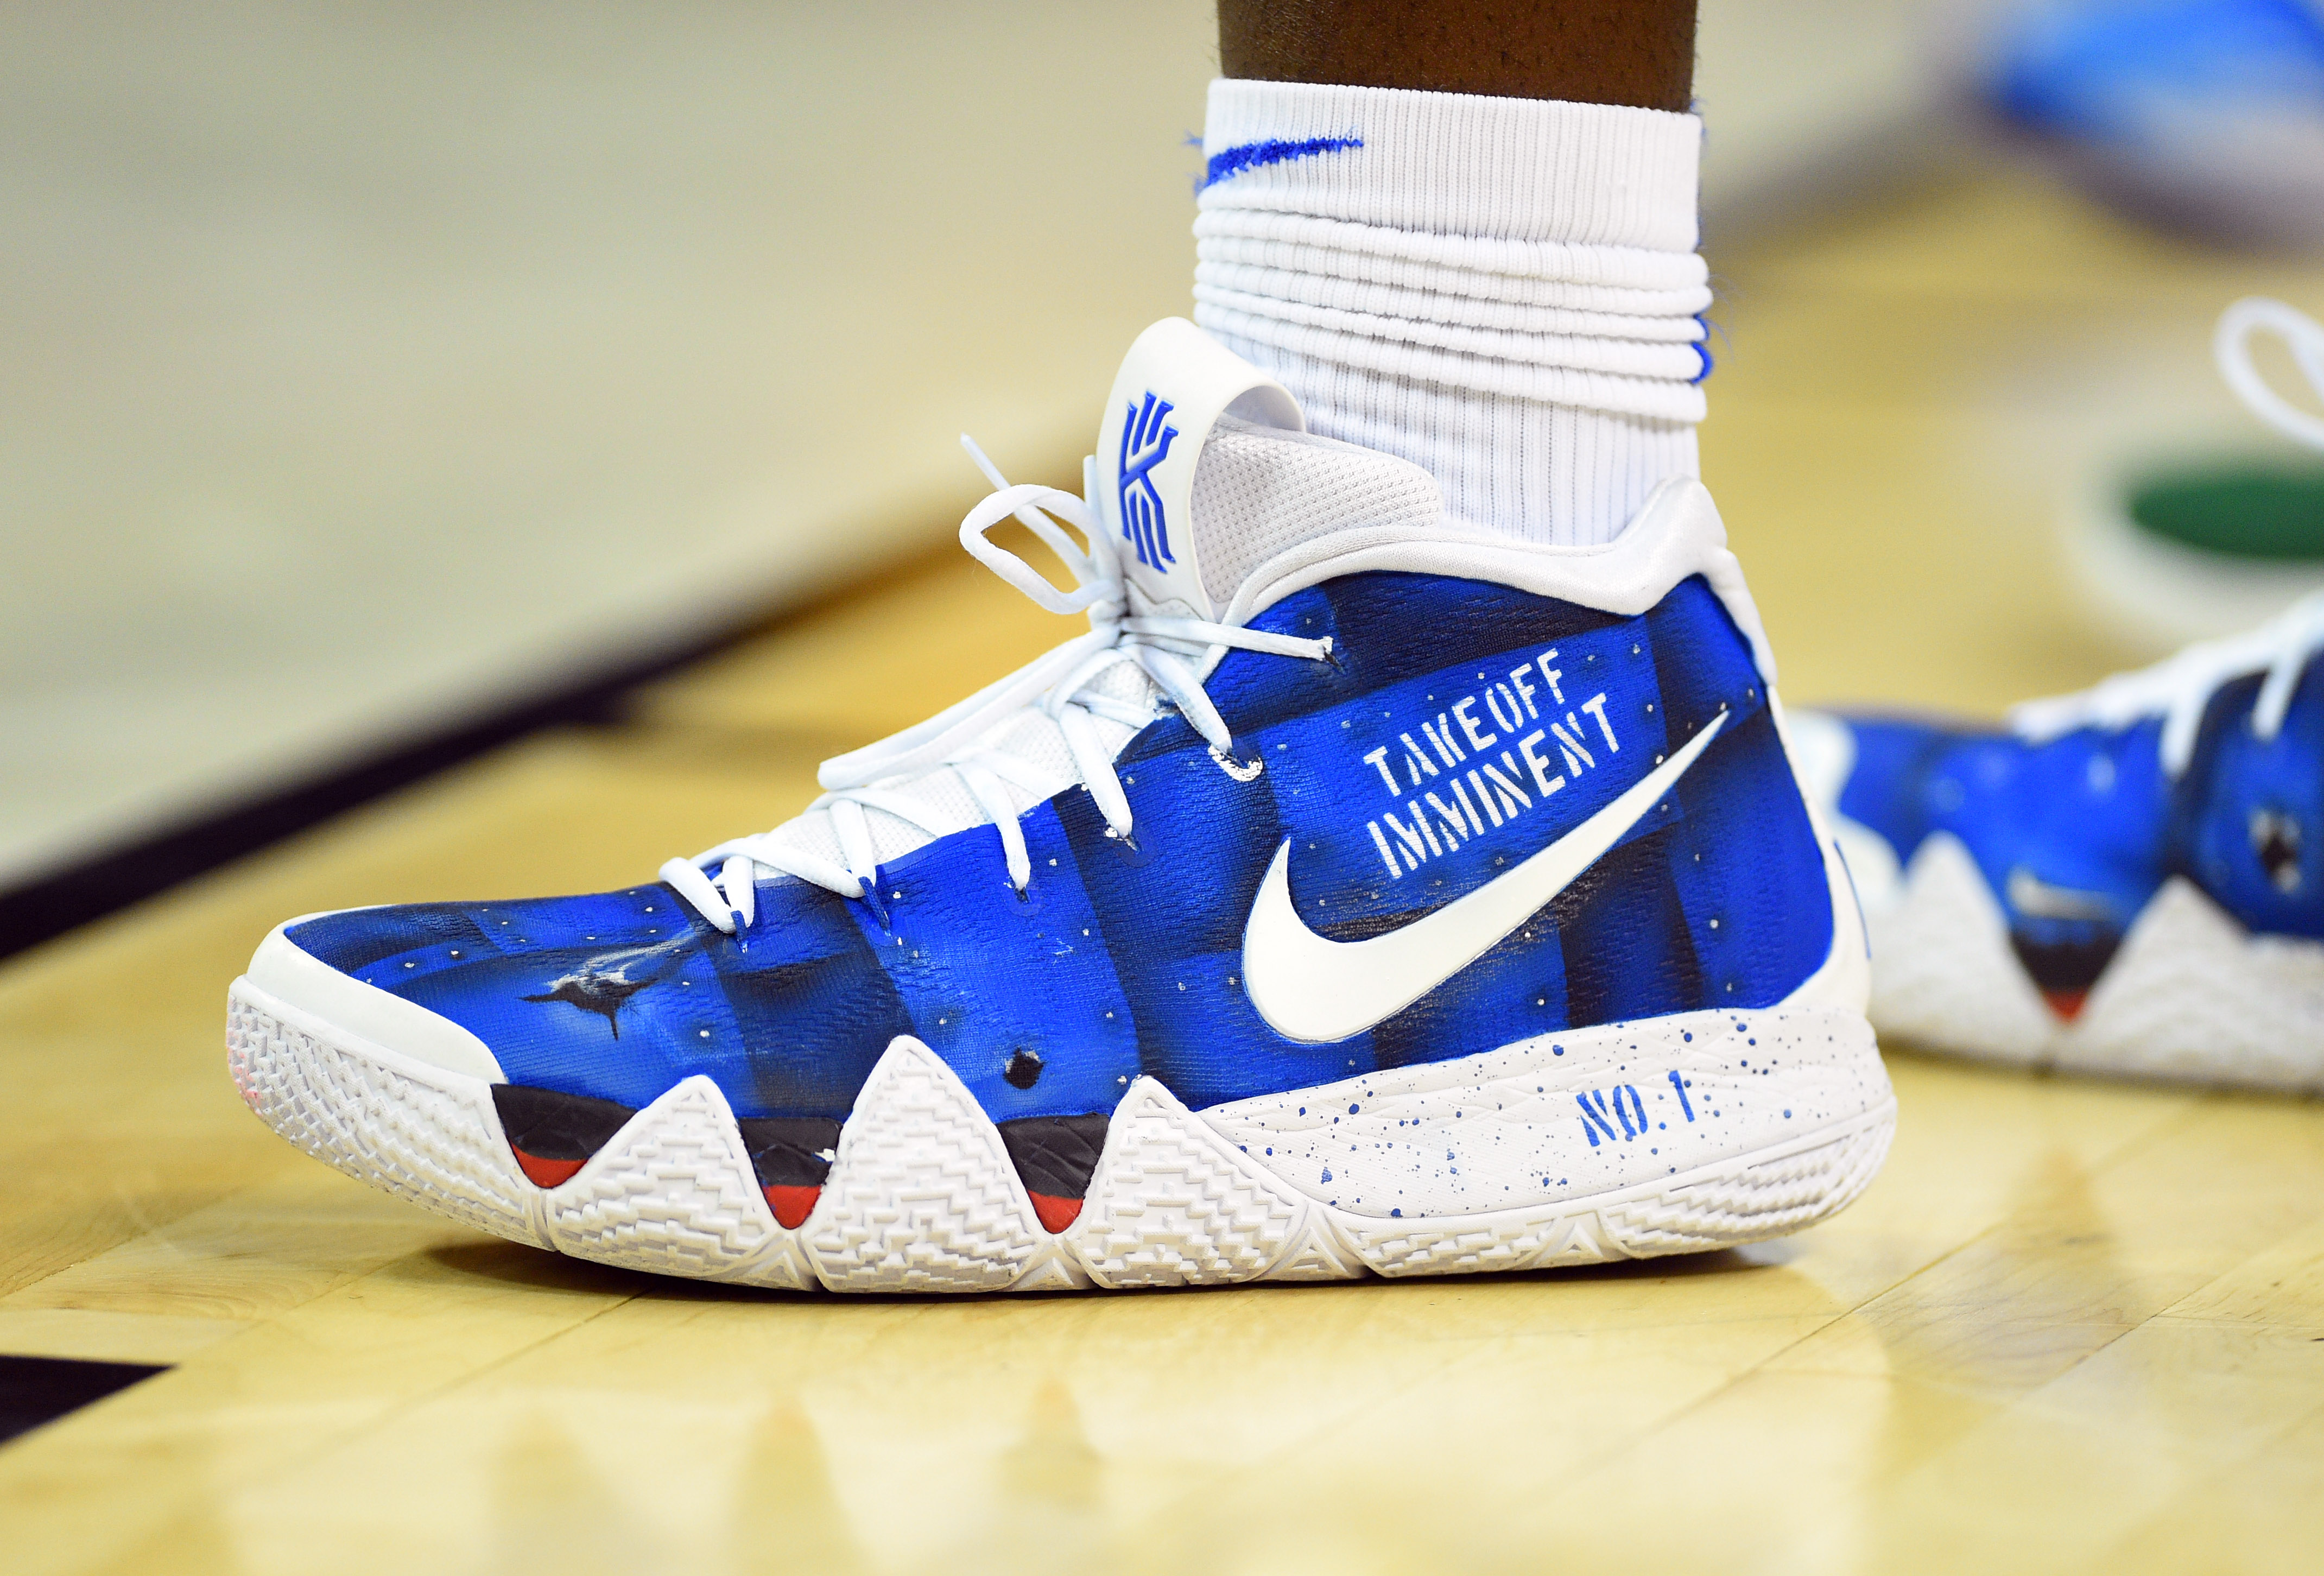 Zion Williamson is making the right shoe choice with custom LeBron 10s